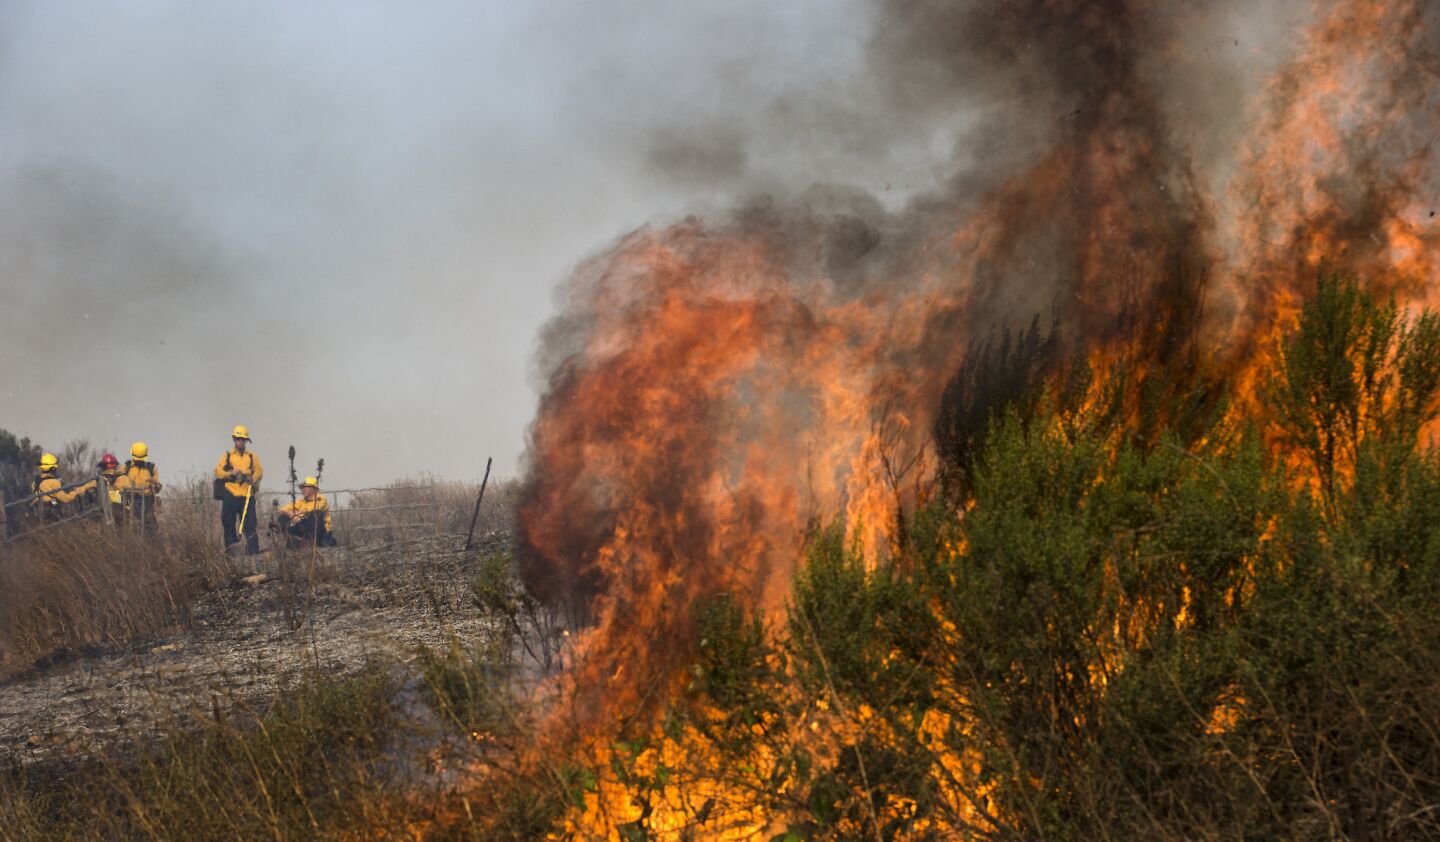 Santa Barbara County firefighters stand by for structure protection as the Sherpa fire consumes heavy brush near Highway 101 on Thursday morning.